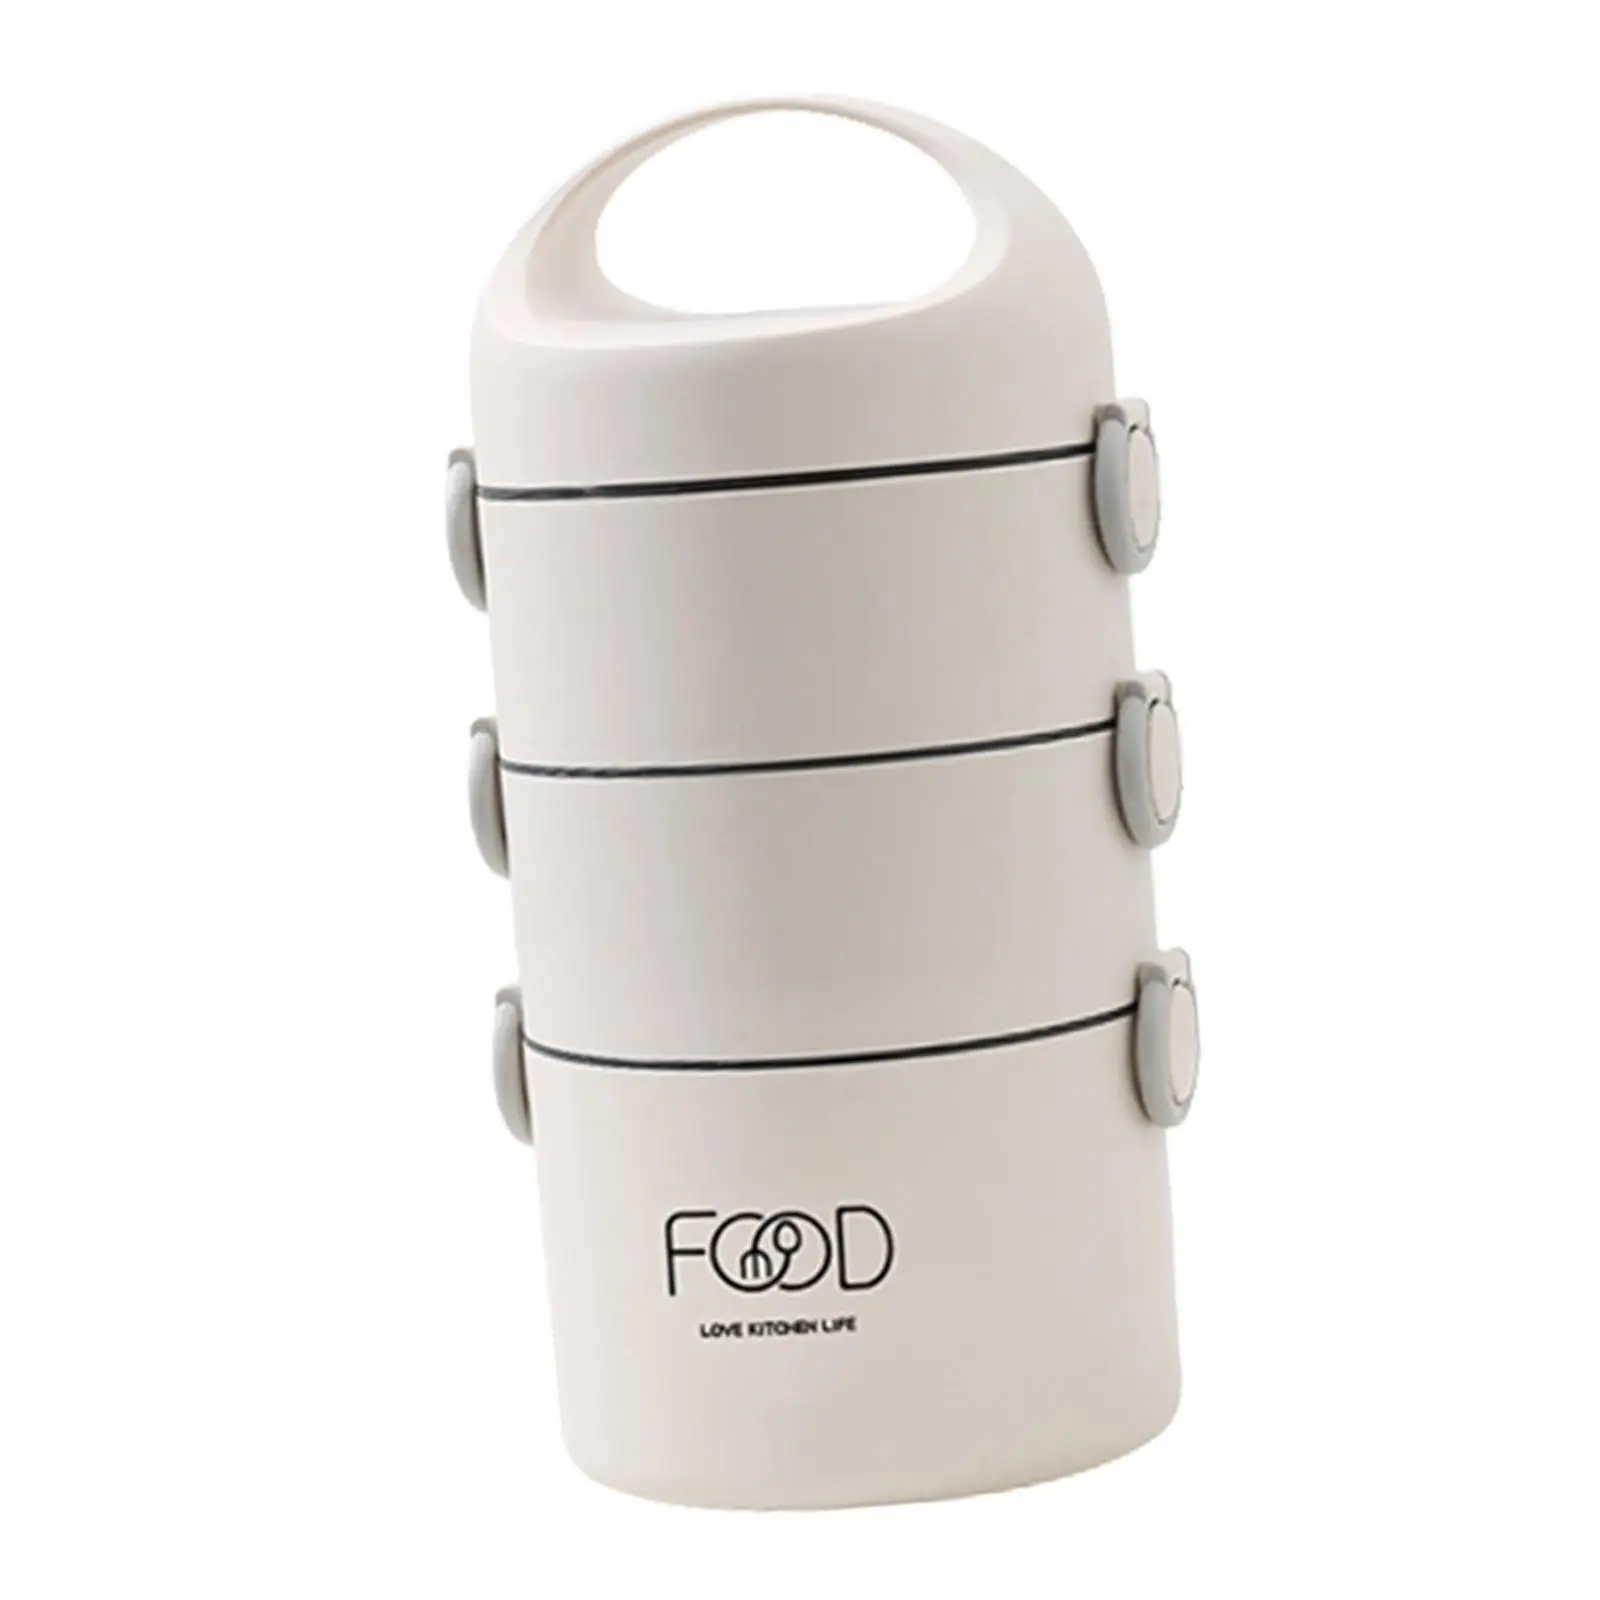 Food Lunch Container Compartment with Handle Microwave Portable Airtight Lid Stackable Lunch Box for office Outdoor